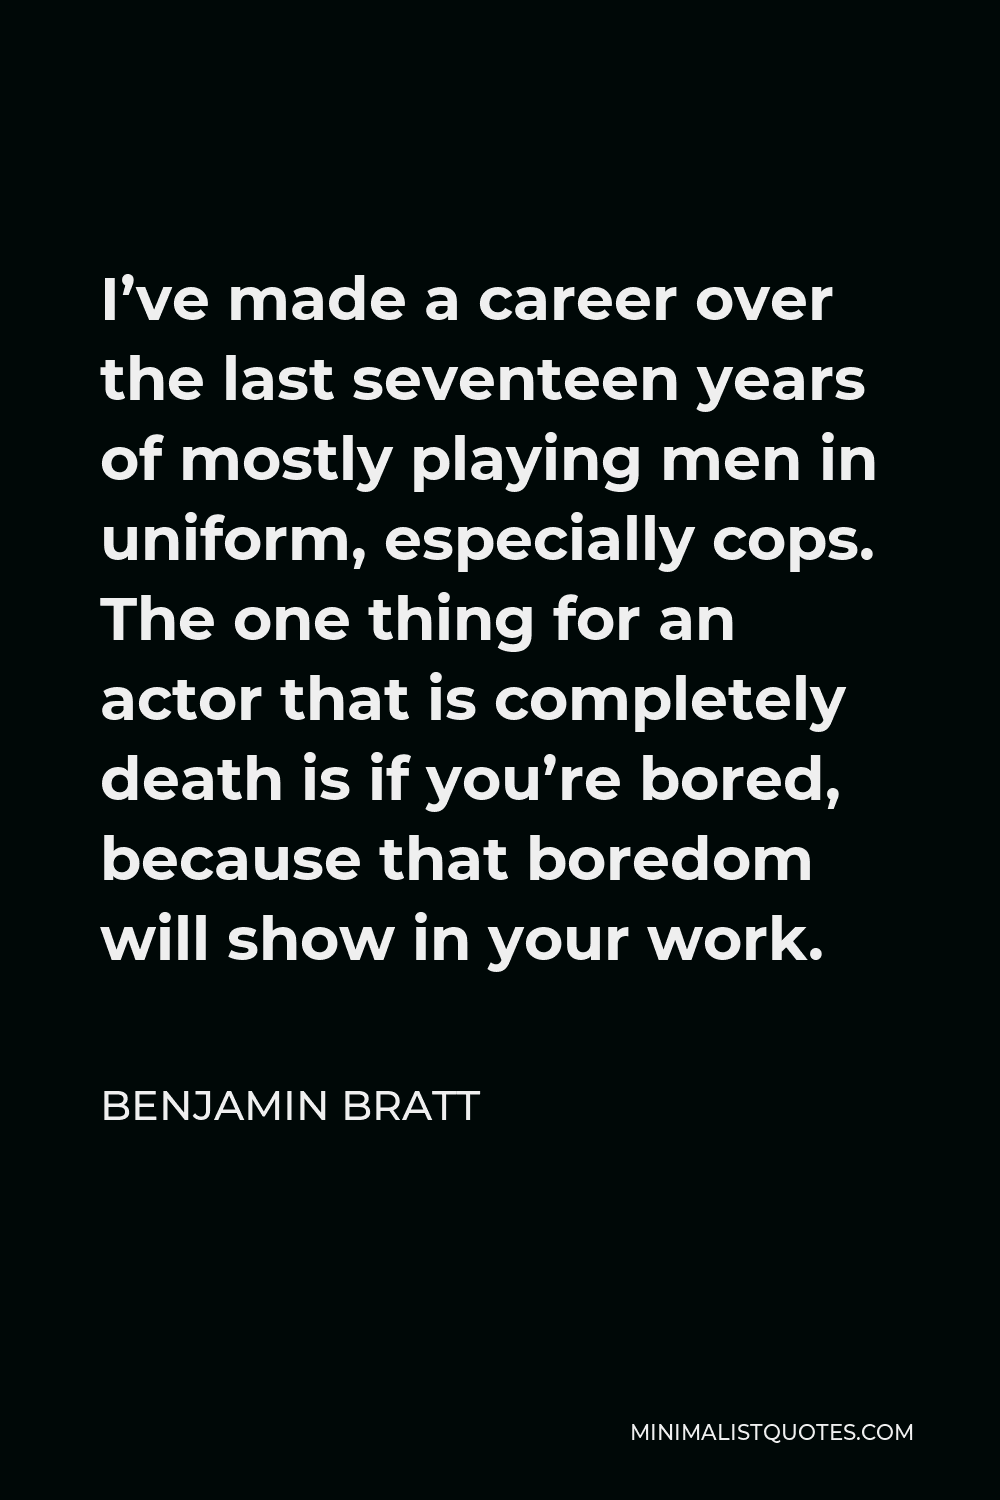 Benjamin Bratt Quote - I’ve made a career over the last seventeen years of mostly playing men in uniform, especially cops. The one thing for an actor that is death, is if you’re bored. The boredom will show in your work.